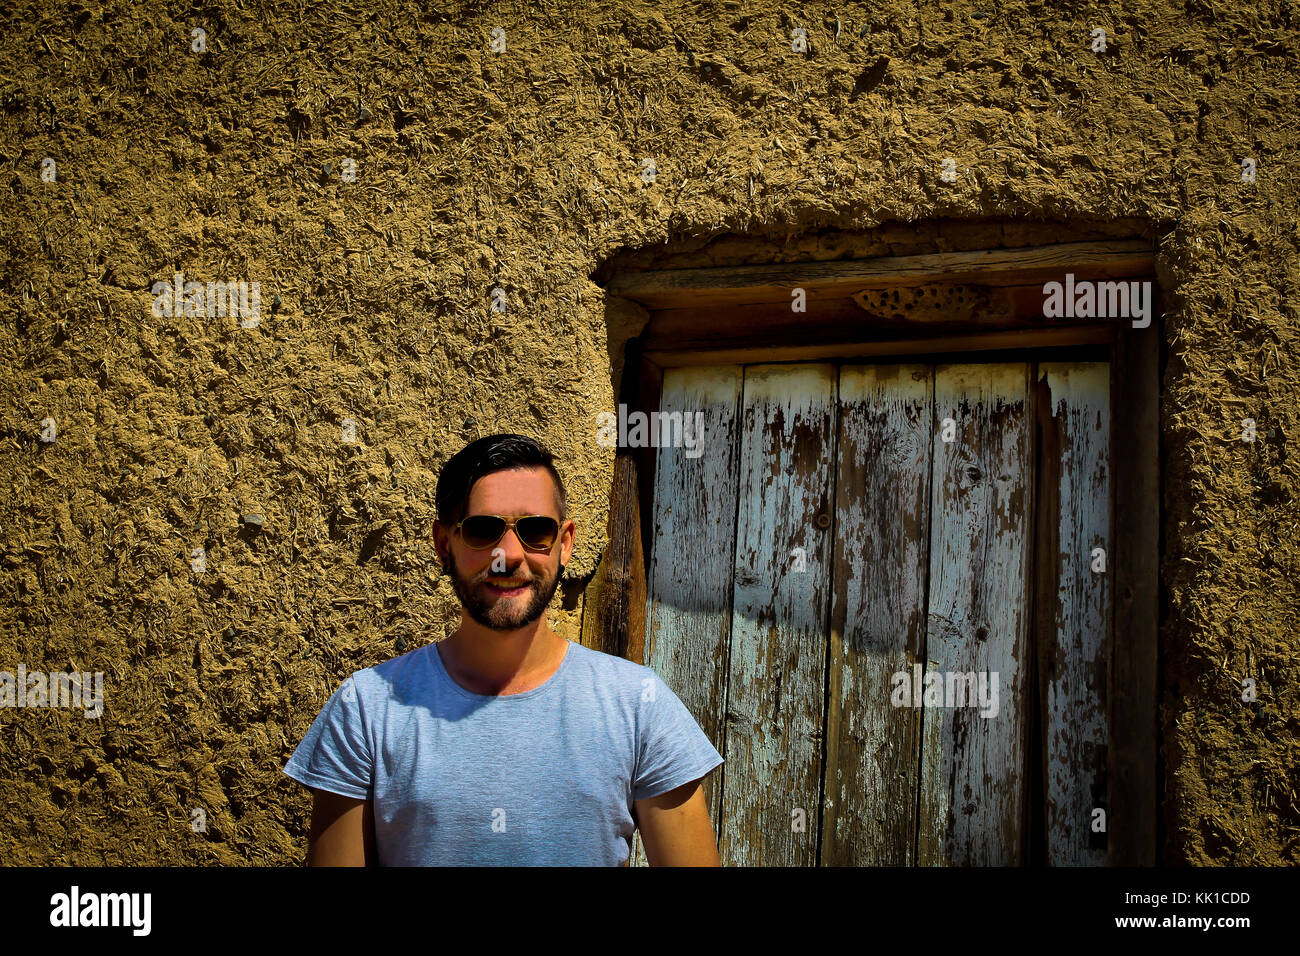 Smiling Caucasian man with sunglasses standing in front of door of mud house Stock Photo